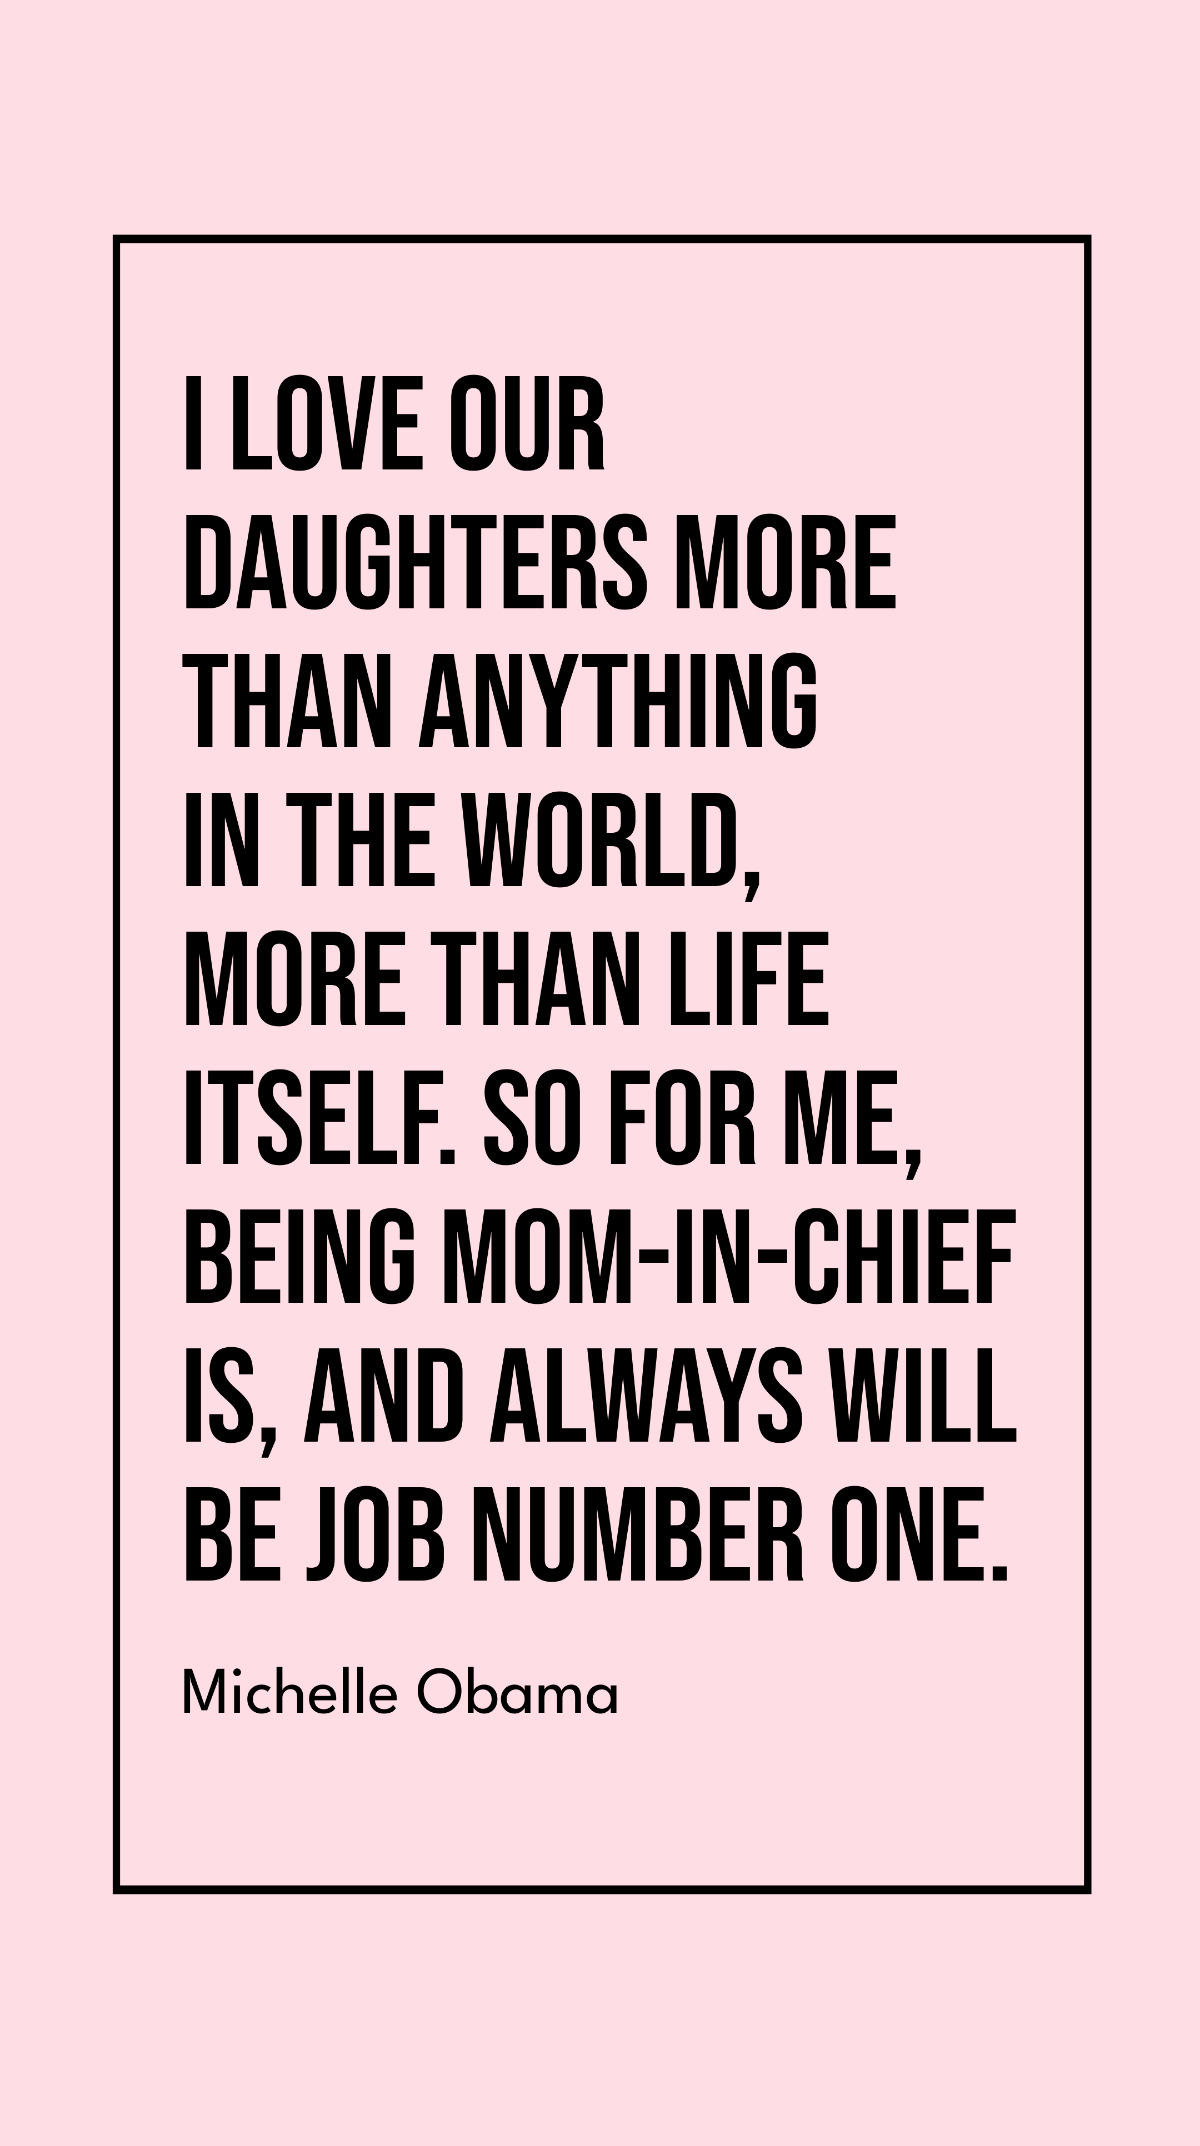 Free Michelle Obama - I love our daughters more than anything in the world, more than life itself. So for me, being Mom-in-Chief is, and always will be job number one. Template